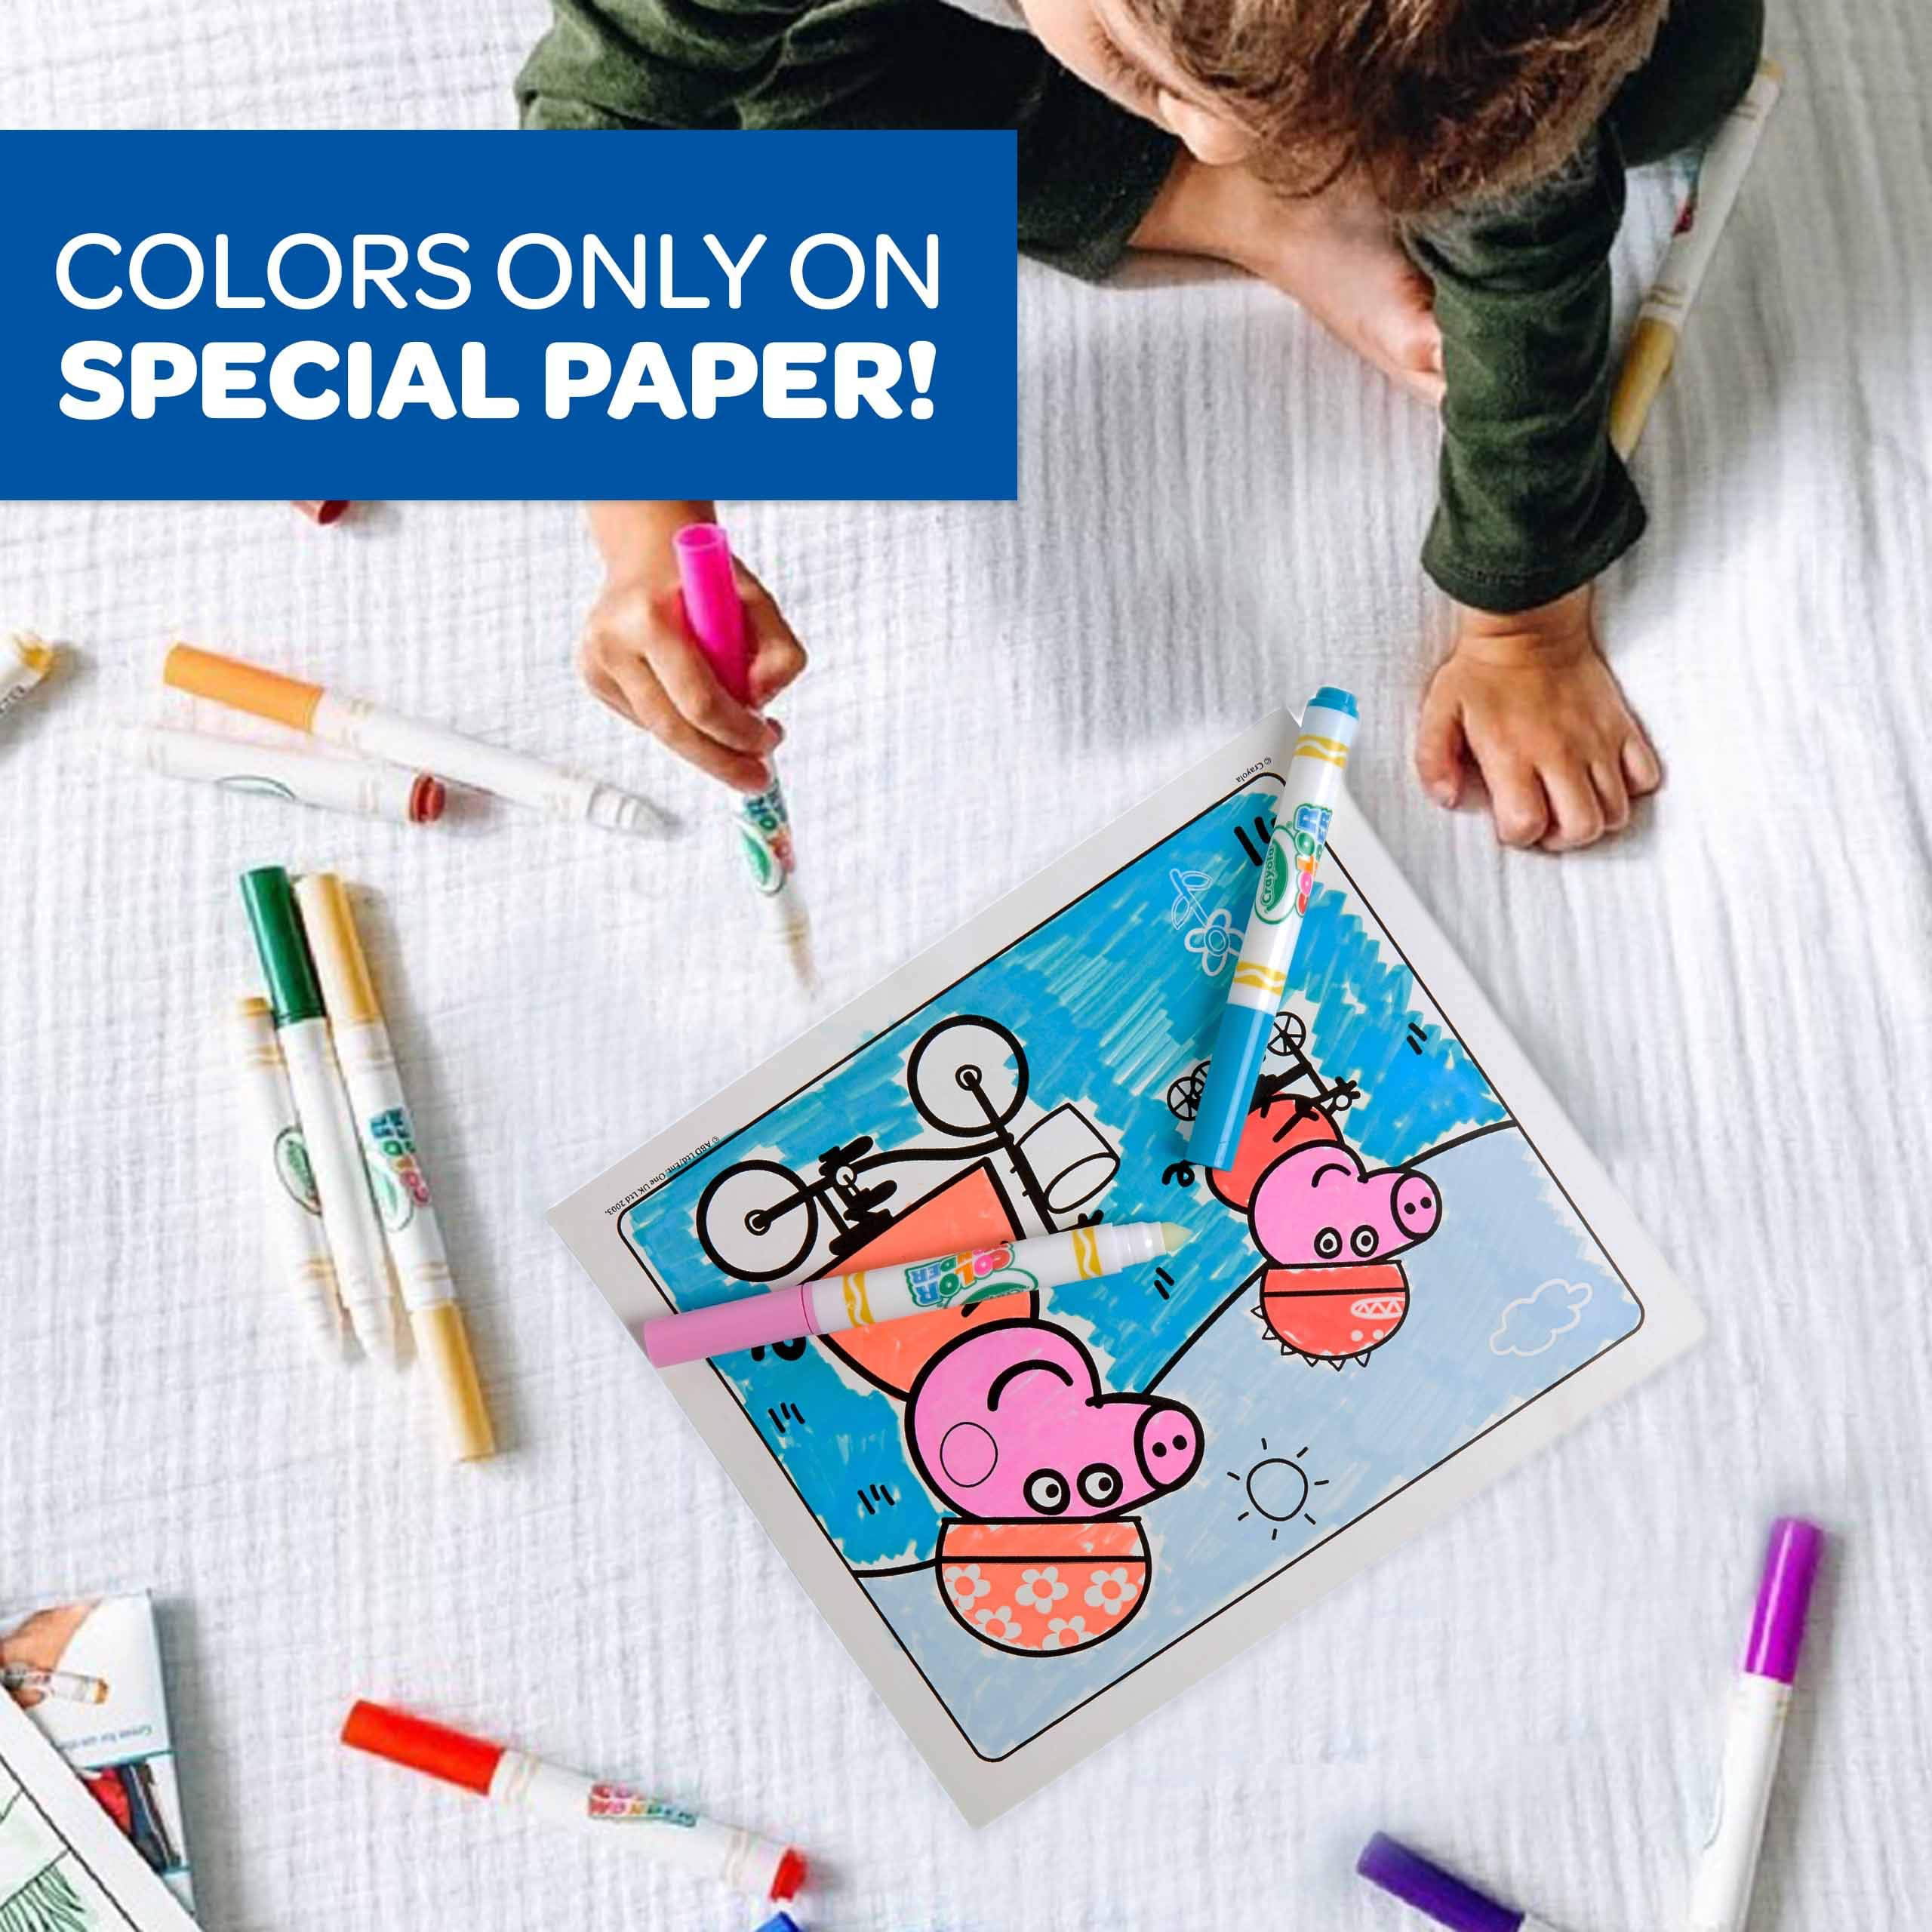 9PC Peppa Pig Coloring Book Kit Washable Markers Drawing Activities Set For  Kids, 1 - Fry's Food Stores